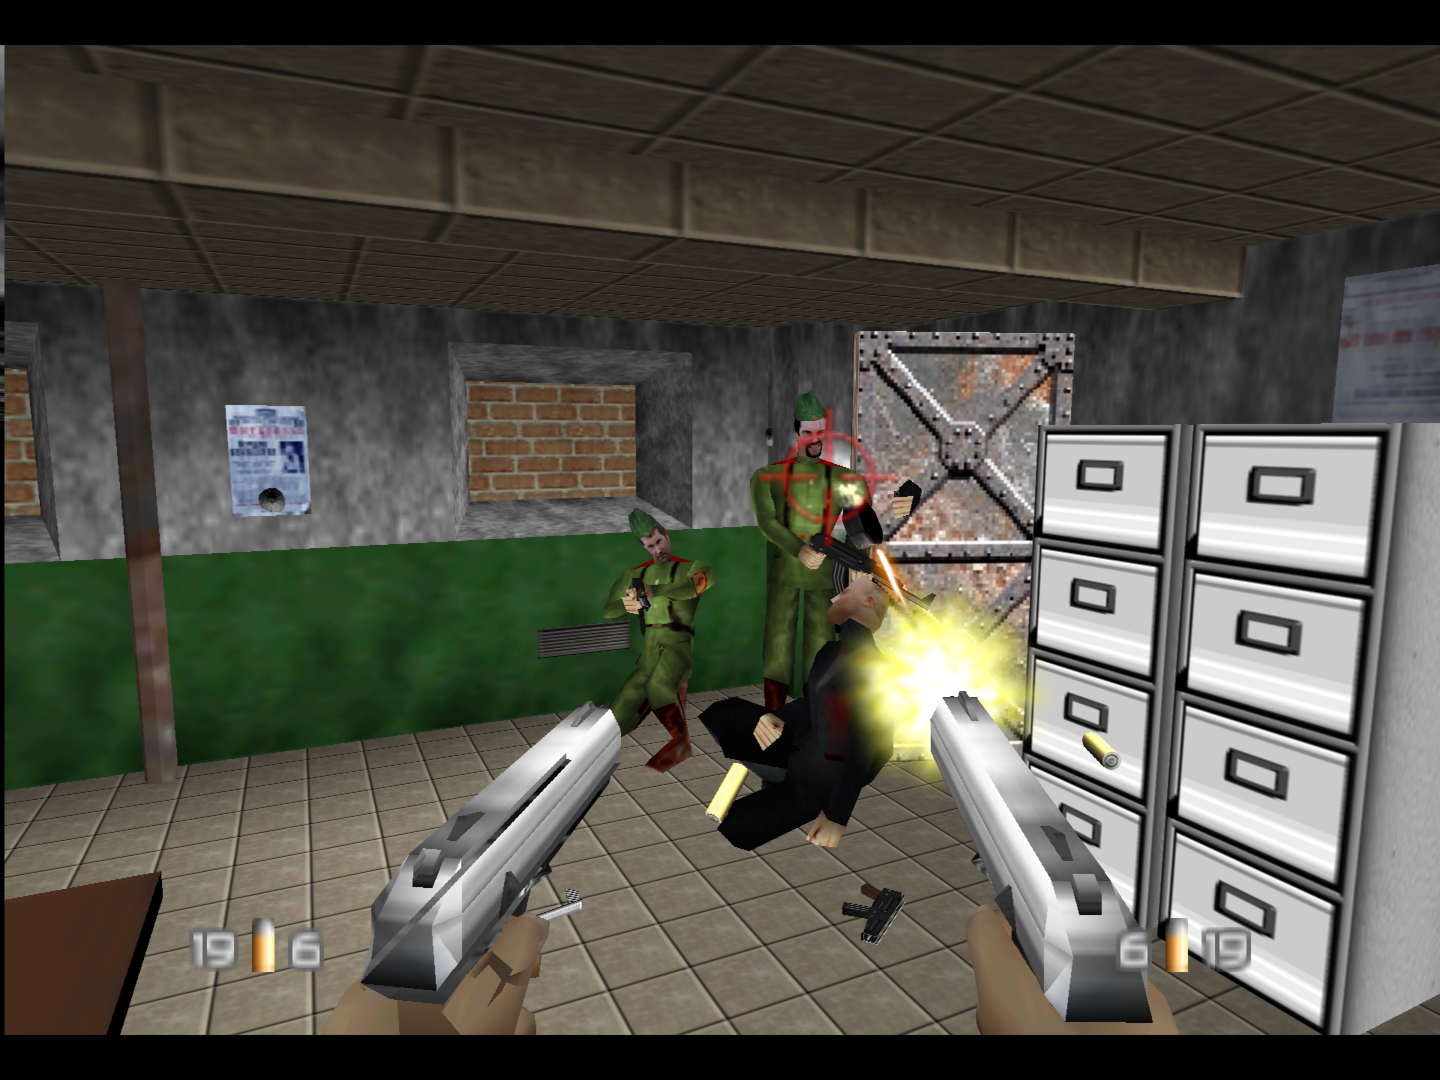 In GoldenEye 007 on the N64, there is a level where Bond needs to retrieve  a video tape from a bunker. The video tape is a VHS copy of GoldenEye, the  movie